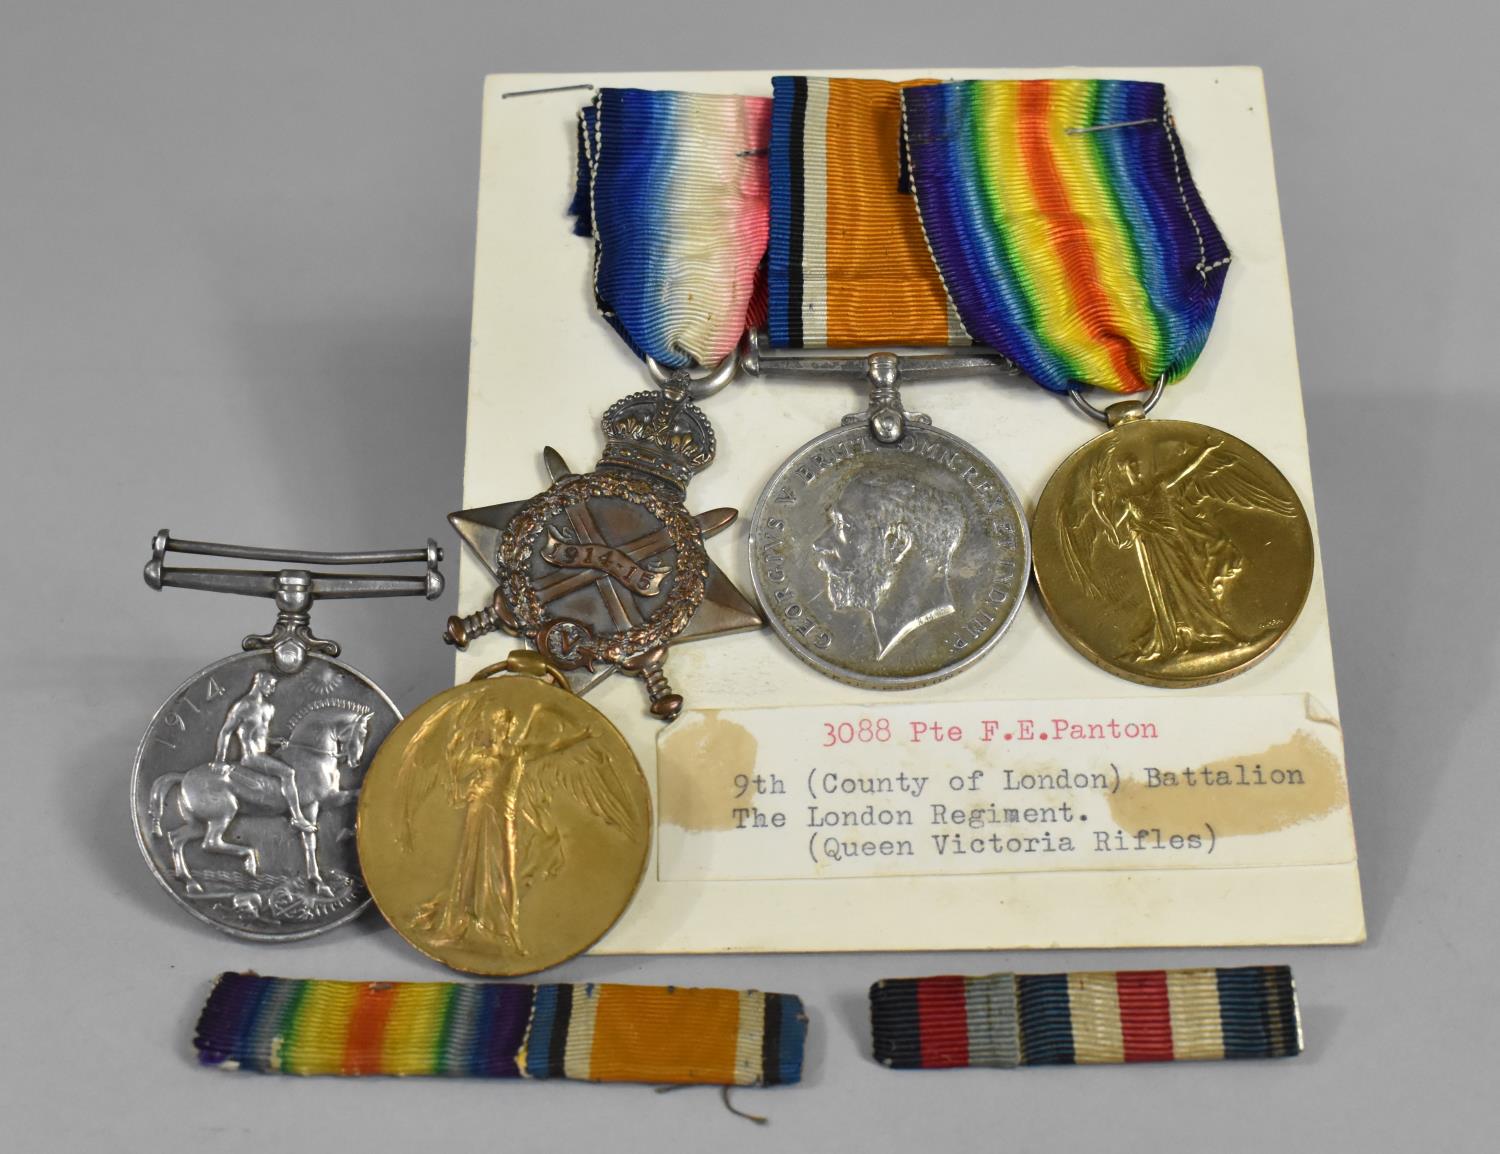 A Collection of WWI Medals Awarded to 3088 PTE F E Panton, London Regiment Together with Two for - Image 2 of 2